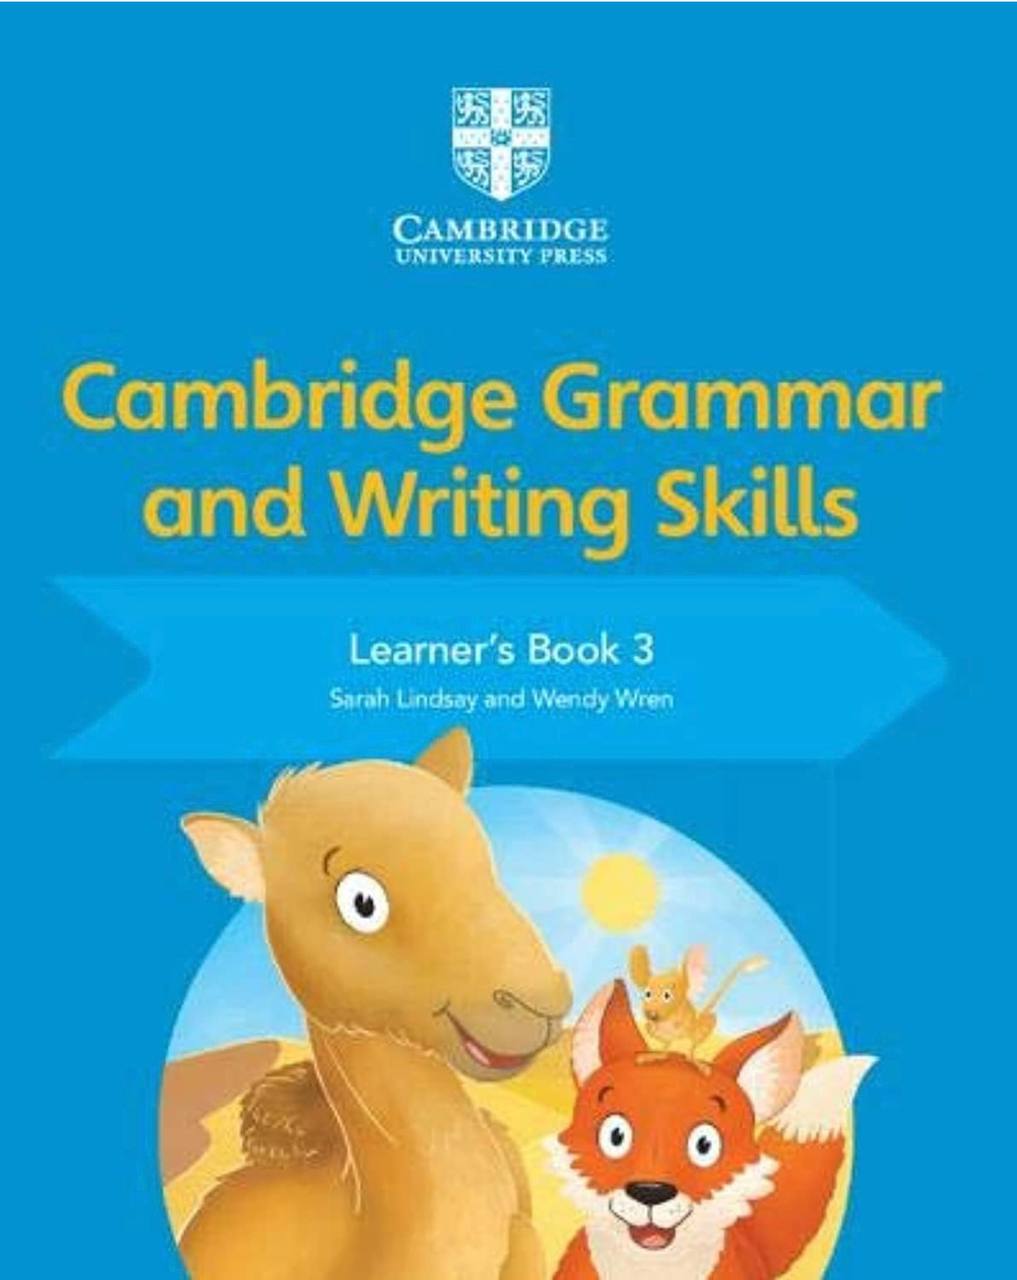 Cambridge Grammar and Writing Skills Learner's Book 1 to 9